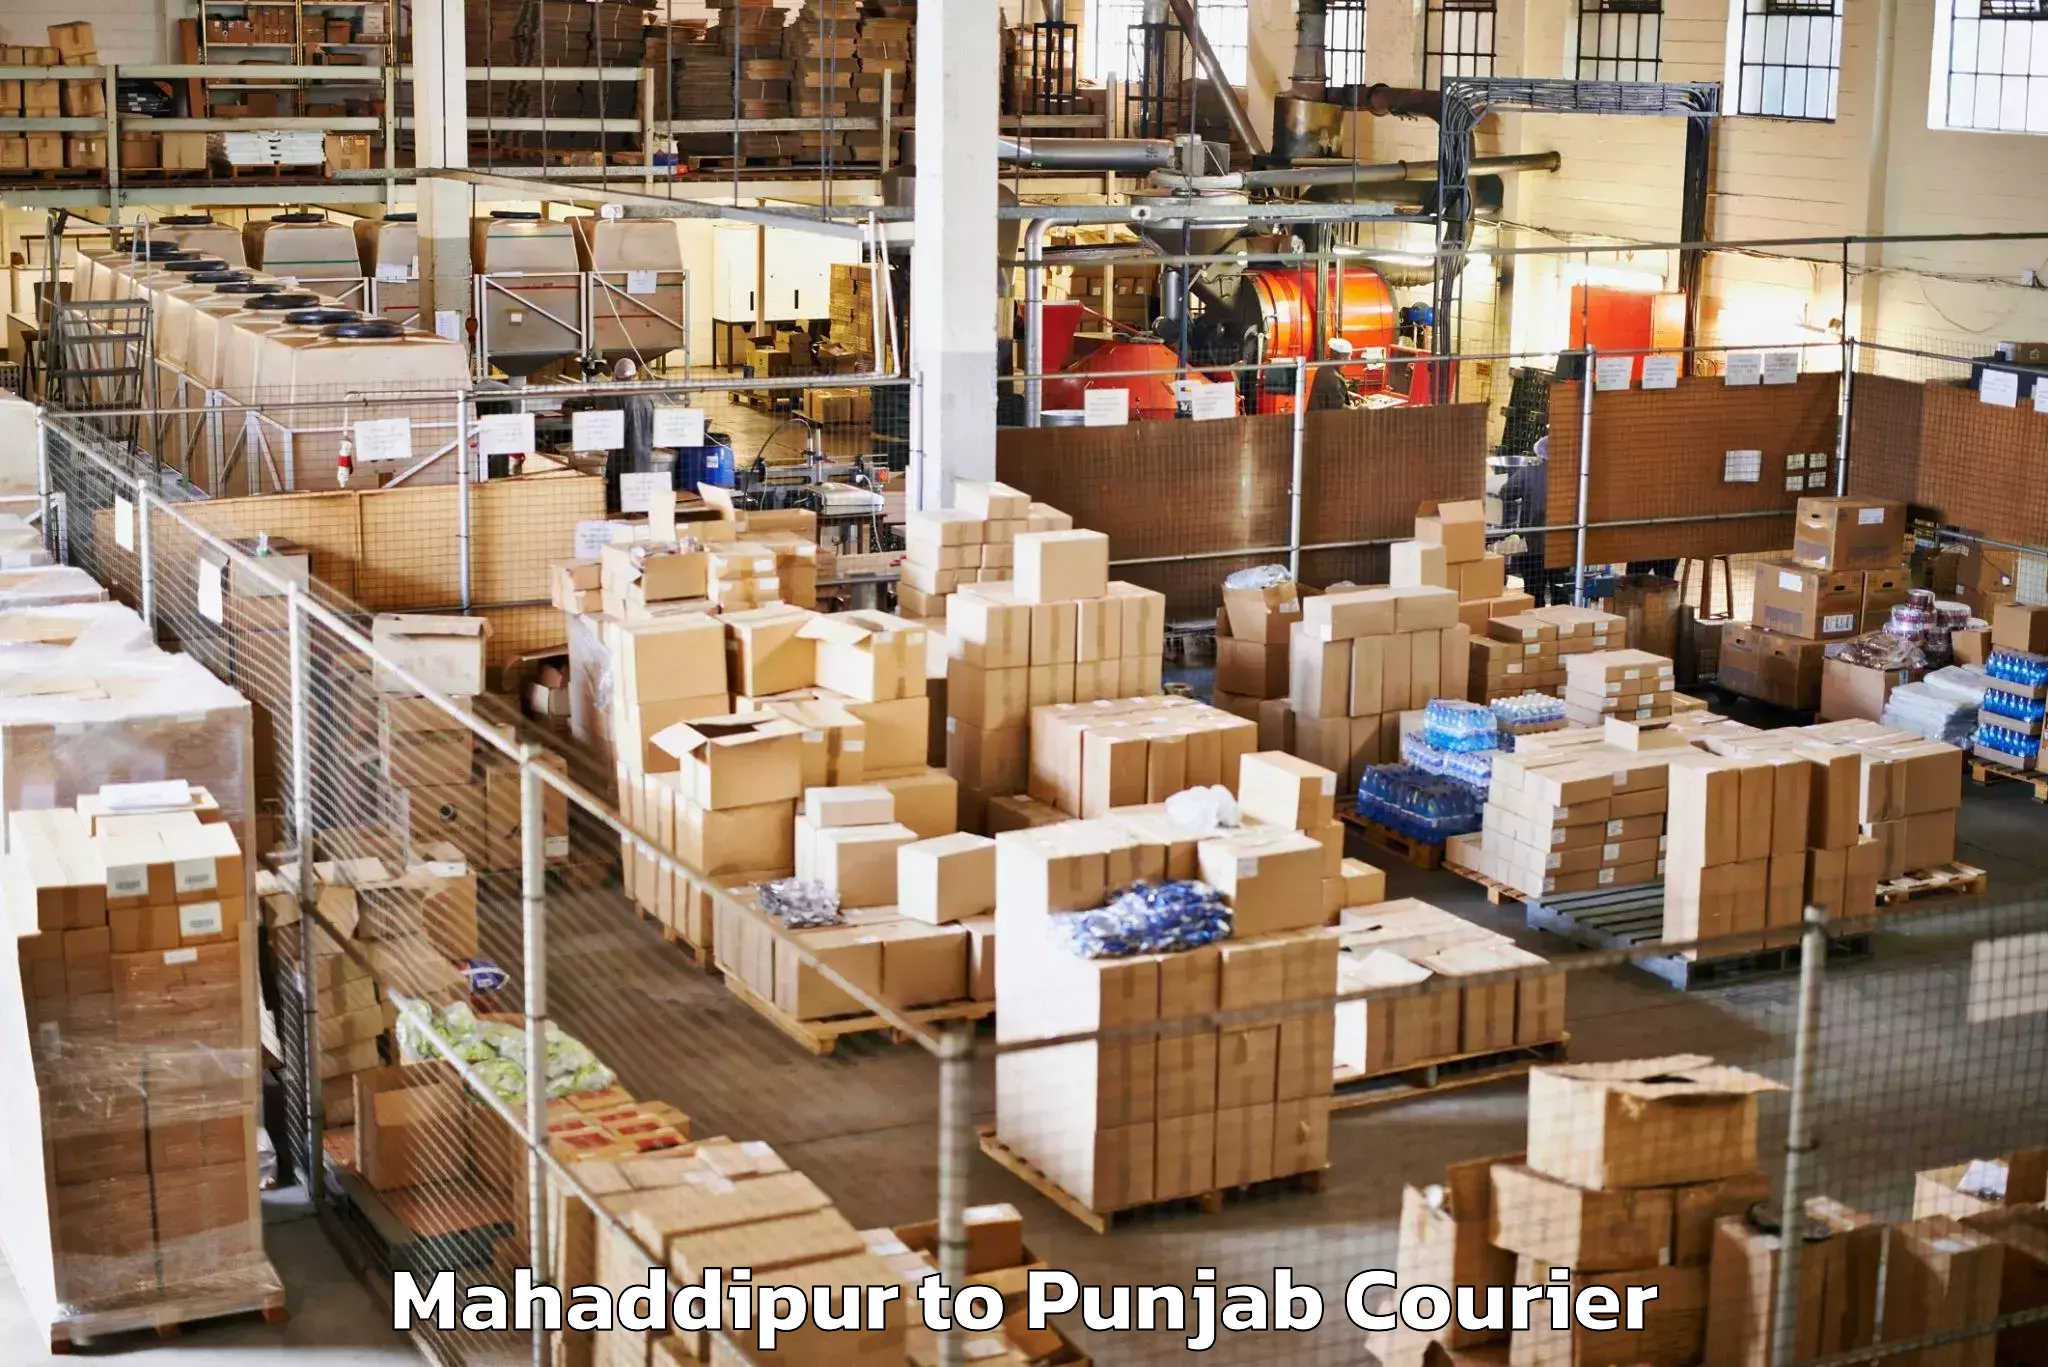 Baggage courier service Mahaddipur to Mohali